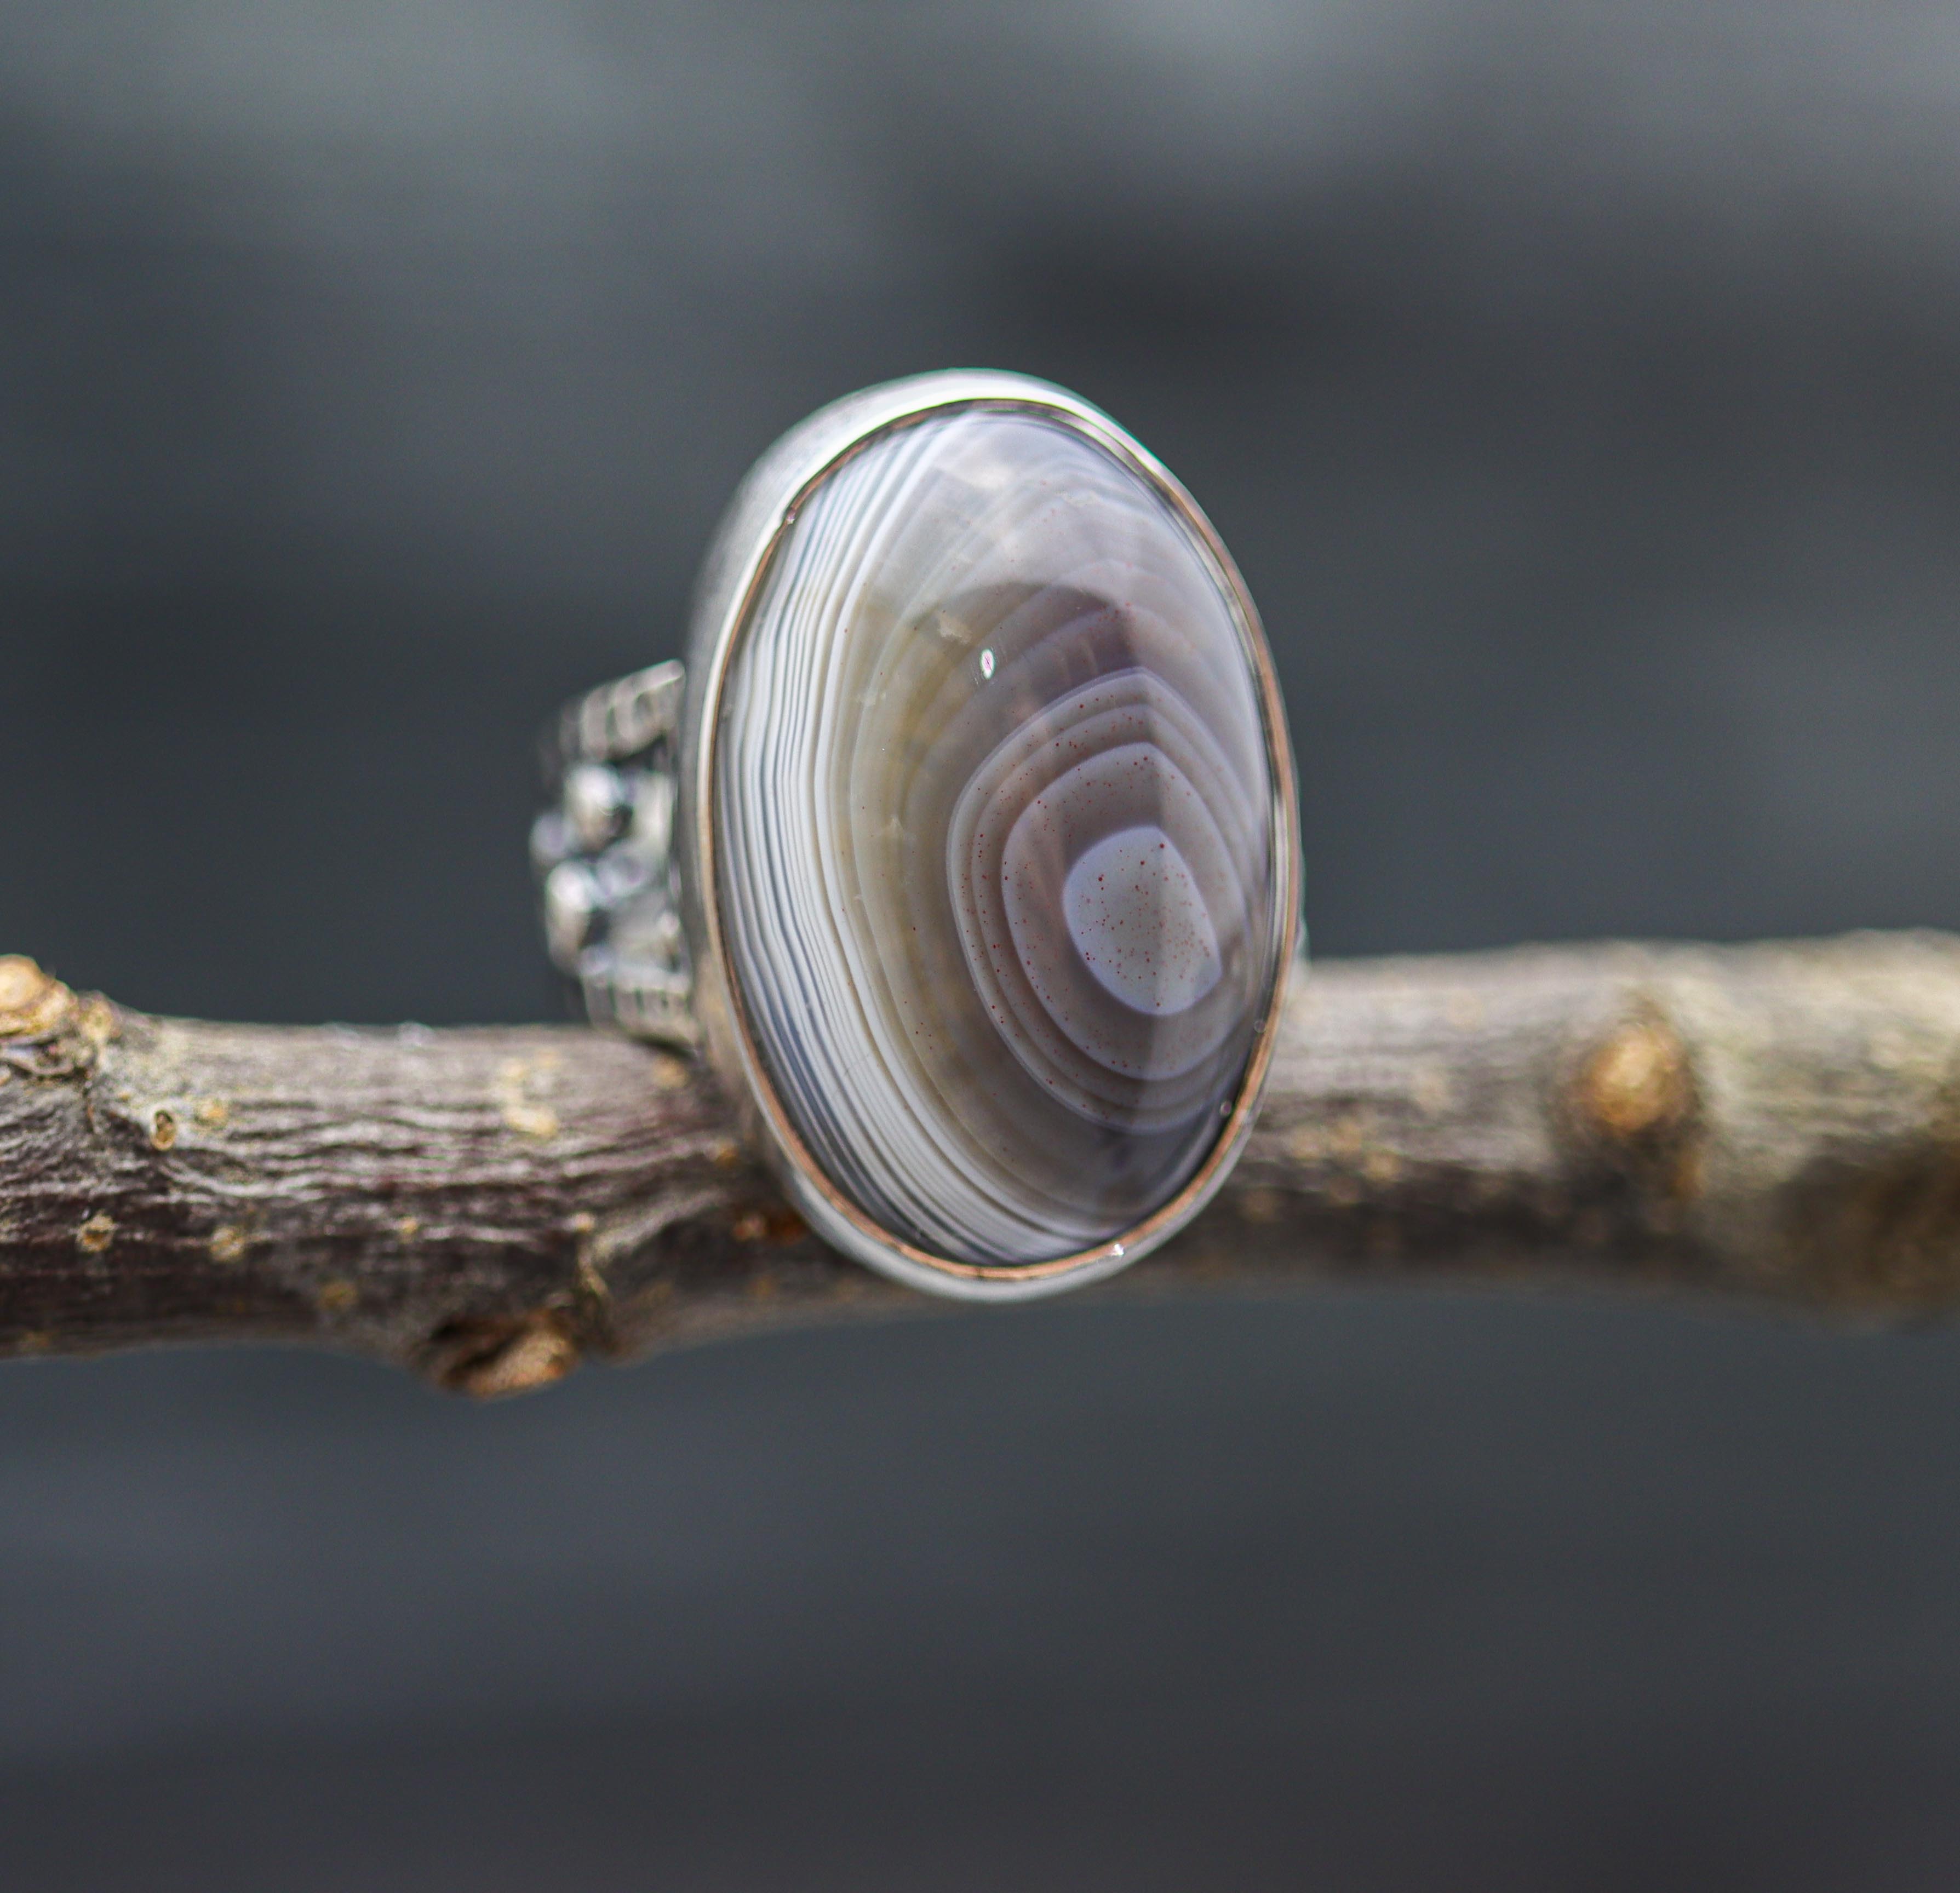 *ON SALE* Botswana Agate Sterling Silver Bubble Band Ring Size 5.75